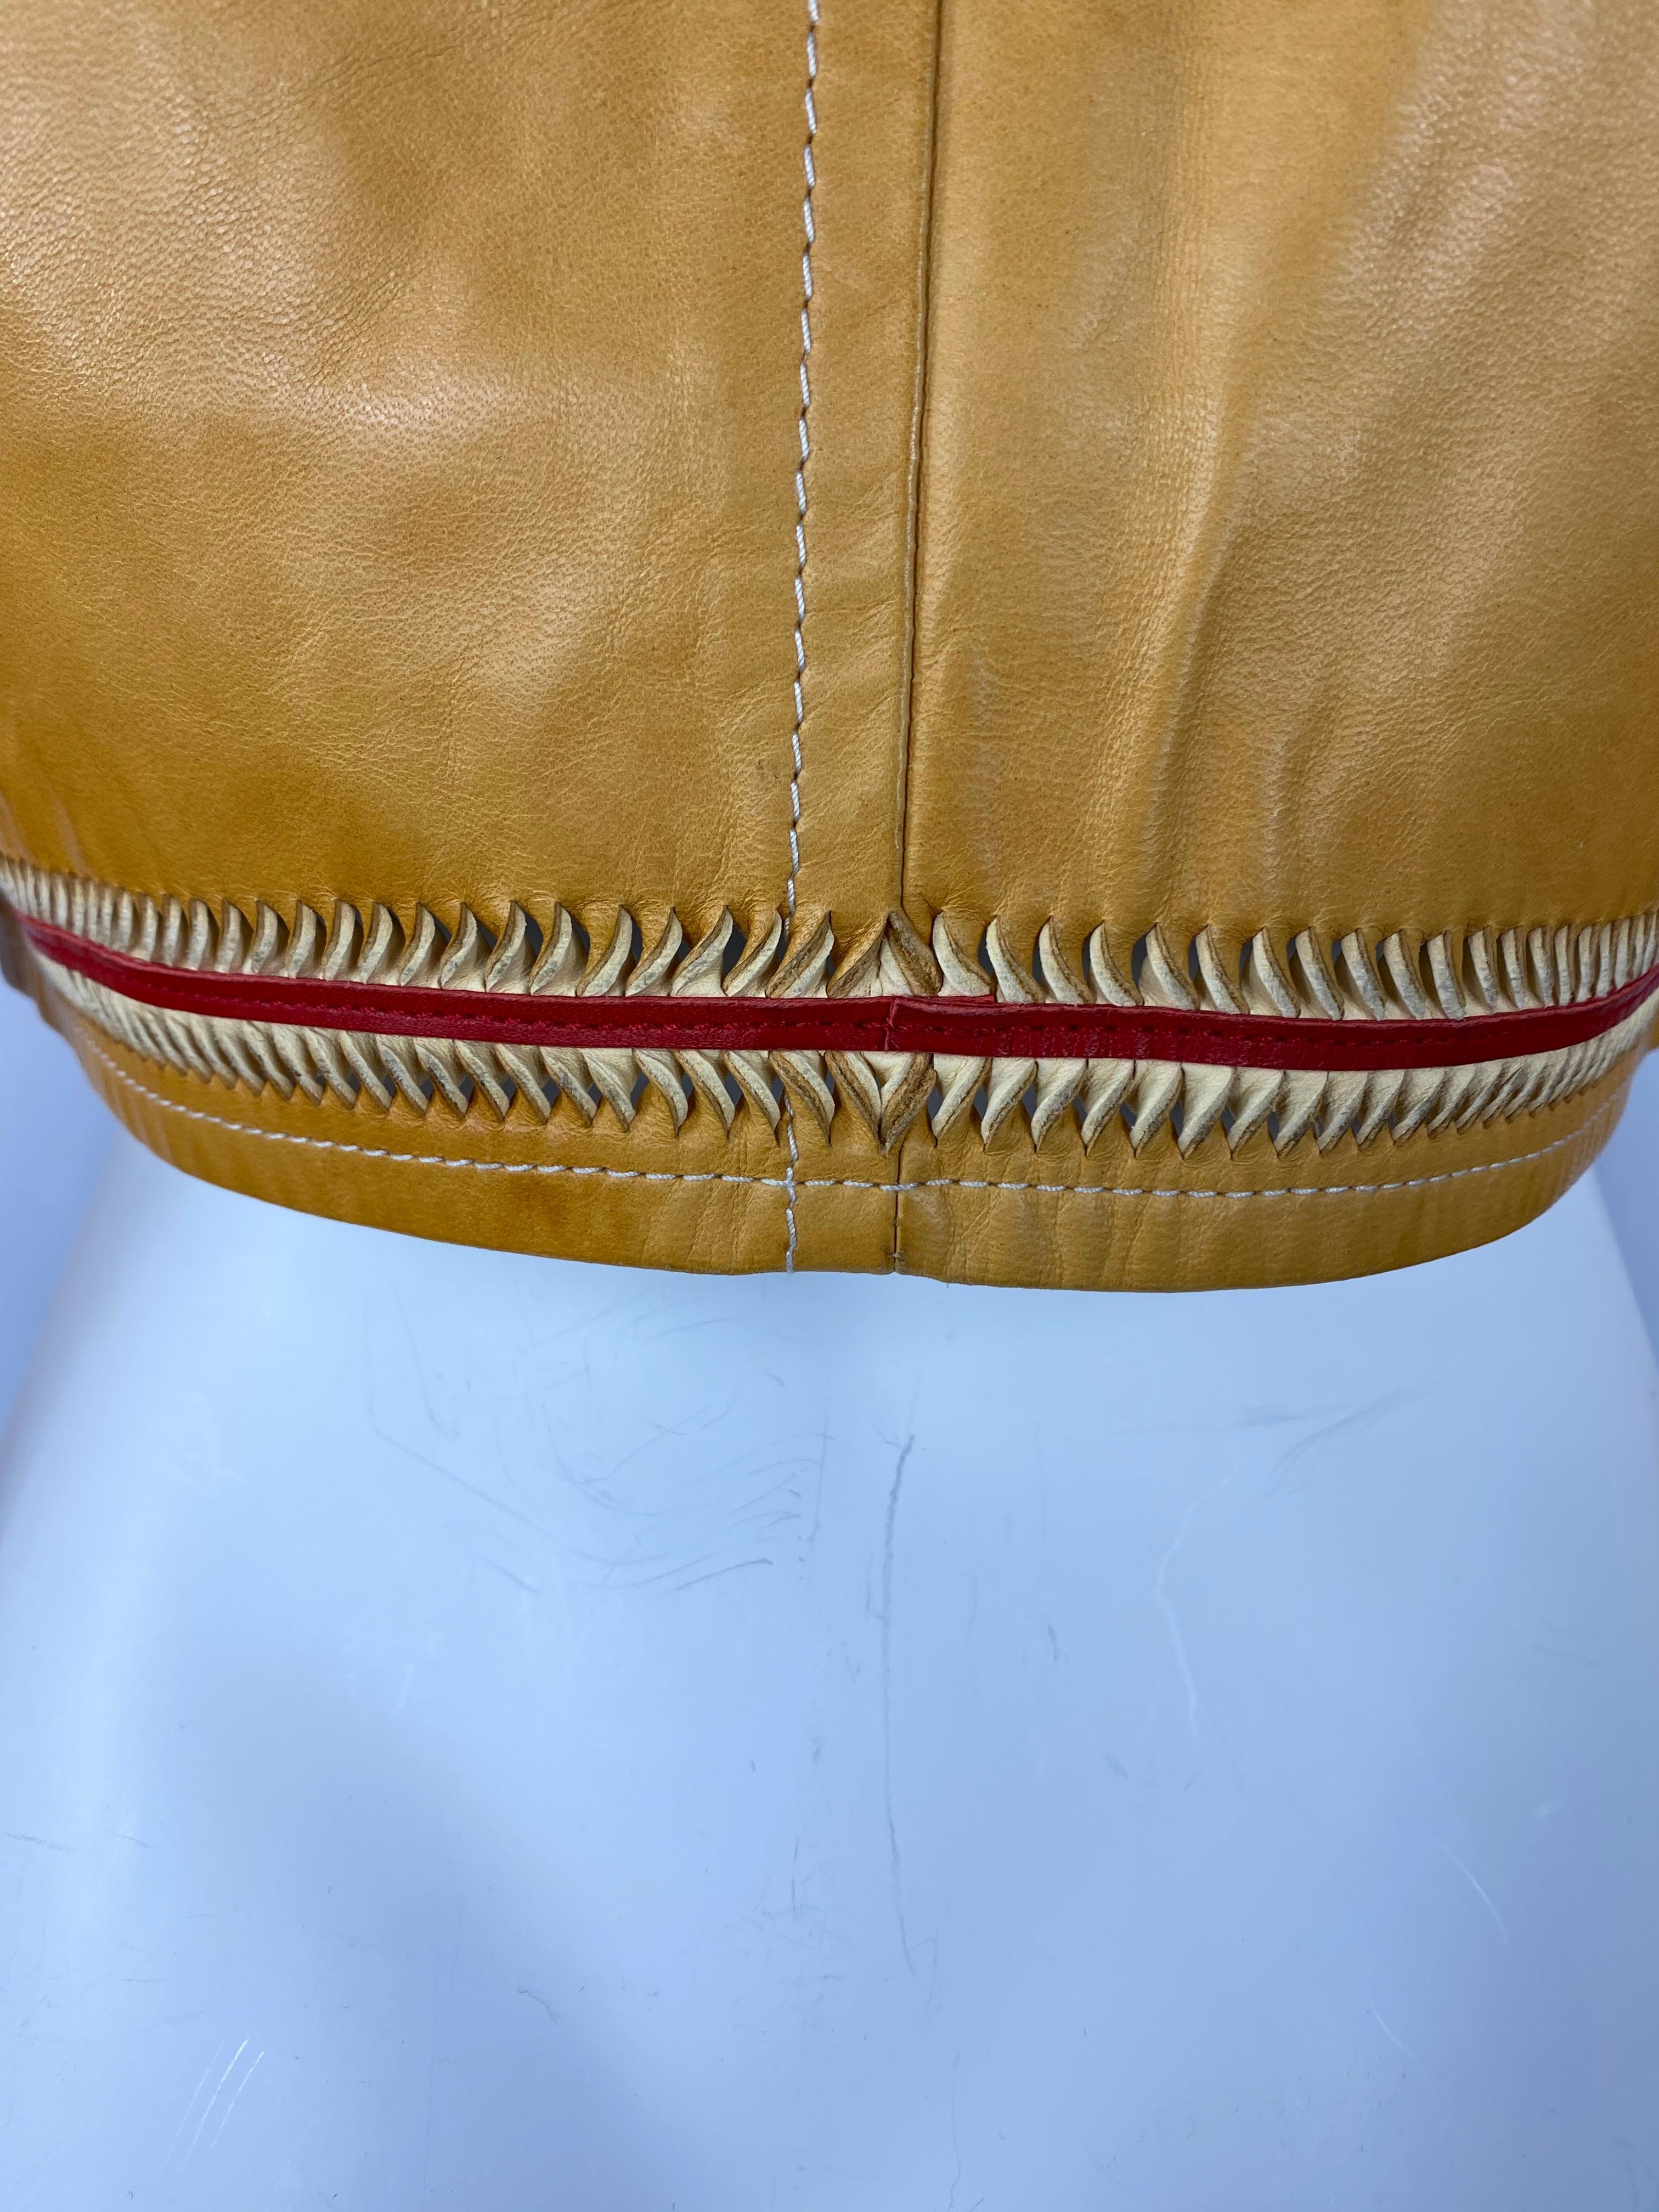 Brown Vintage Dsquared2 Yellow and Red Leather Jacket, Size 42 For Sale